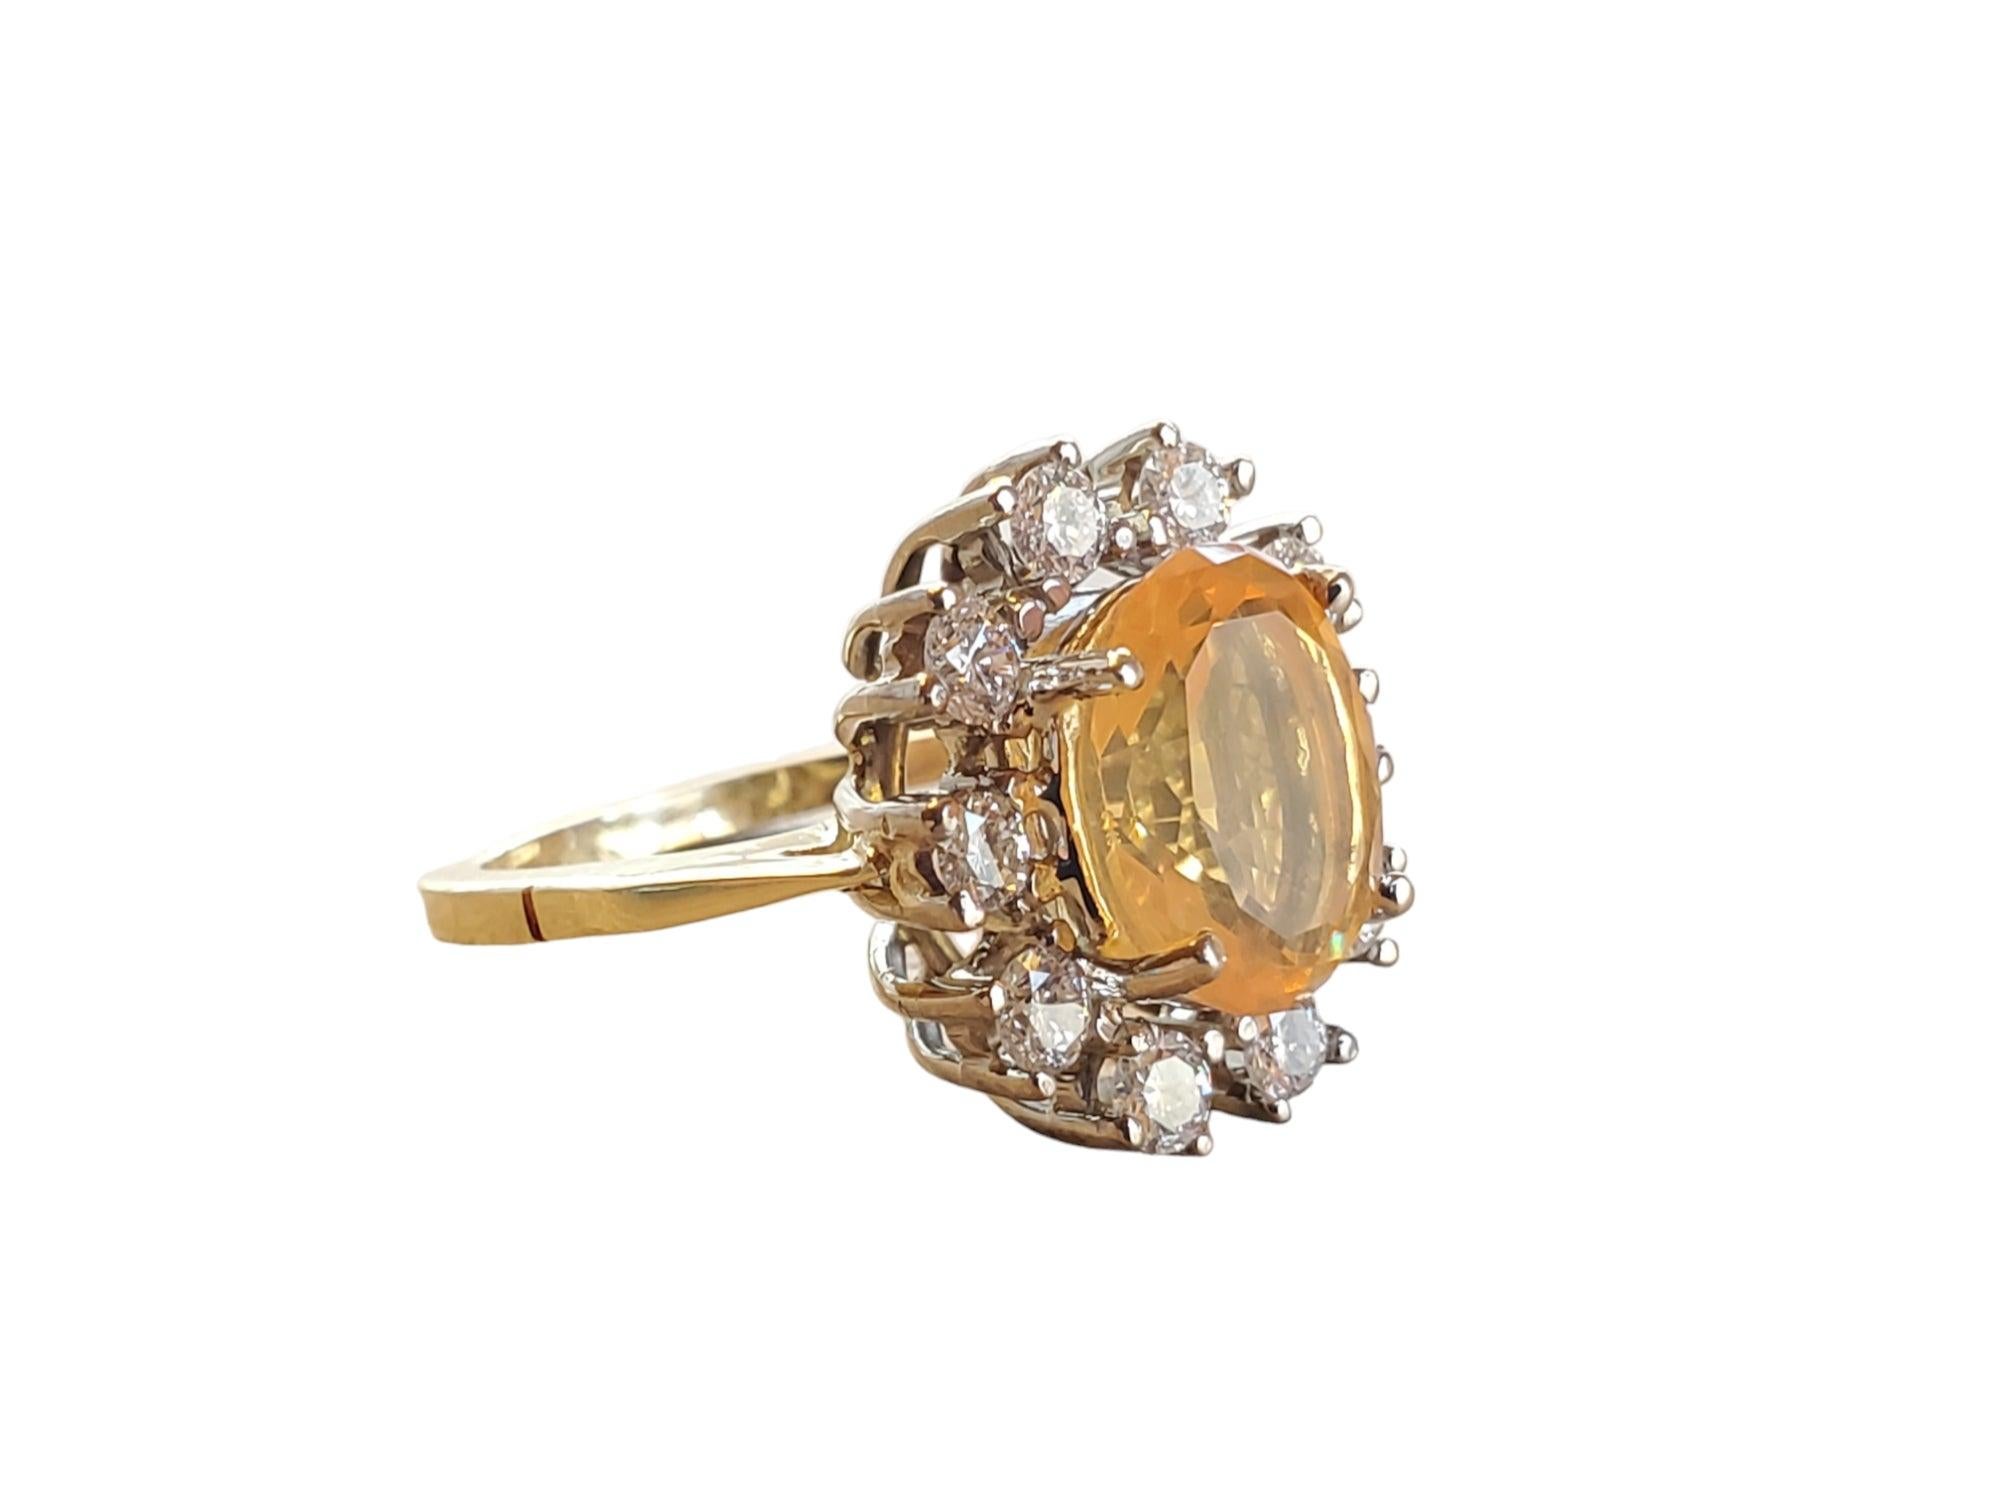 This listing is for an estate fire opal diamond ring in 18k yellow gold and white basket. The center opal is 2.11ct, orangey translucent and beautiful. The surrounding diamonds are all excellent cut colorless vs diamonds at 1tcw. Approx. size 6,